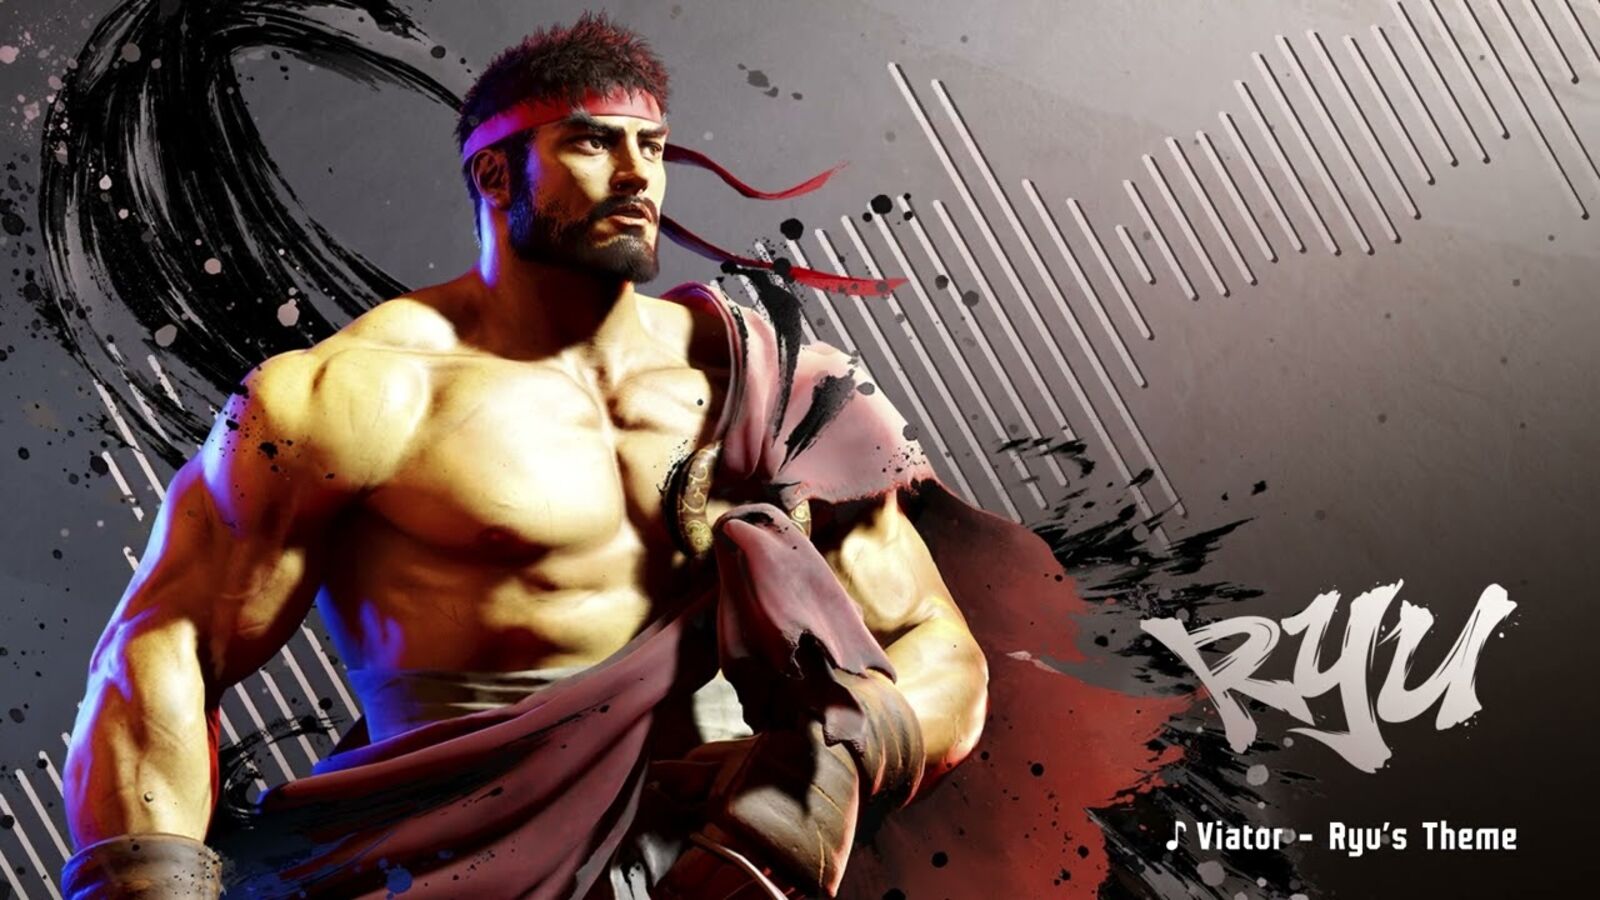 Ryu Gets A Clever New Theme In Street Fighter 6, But Fans Aren't Happy